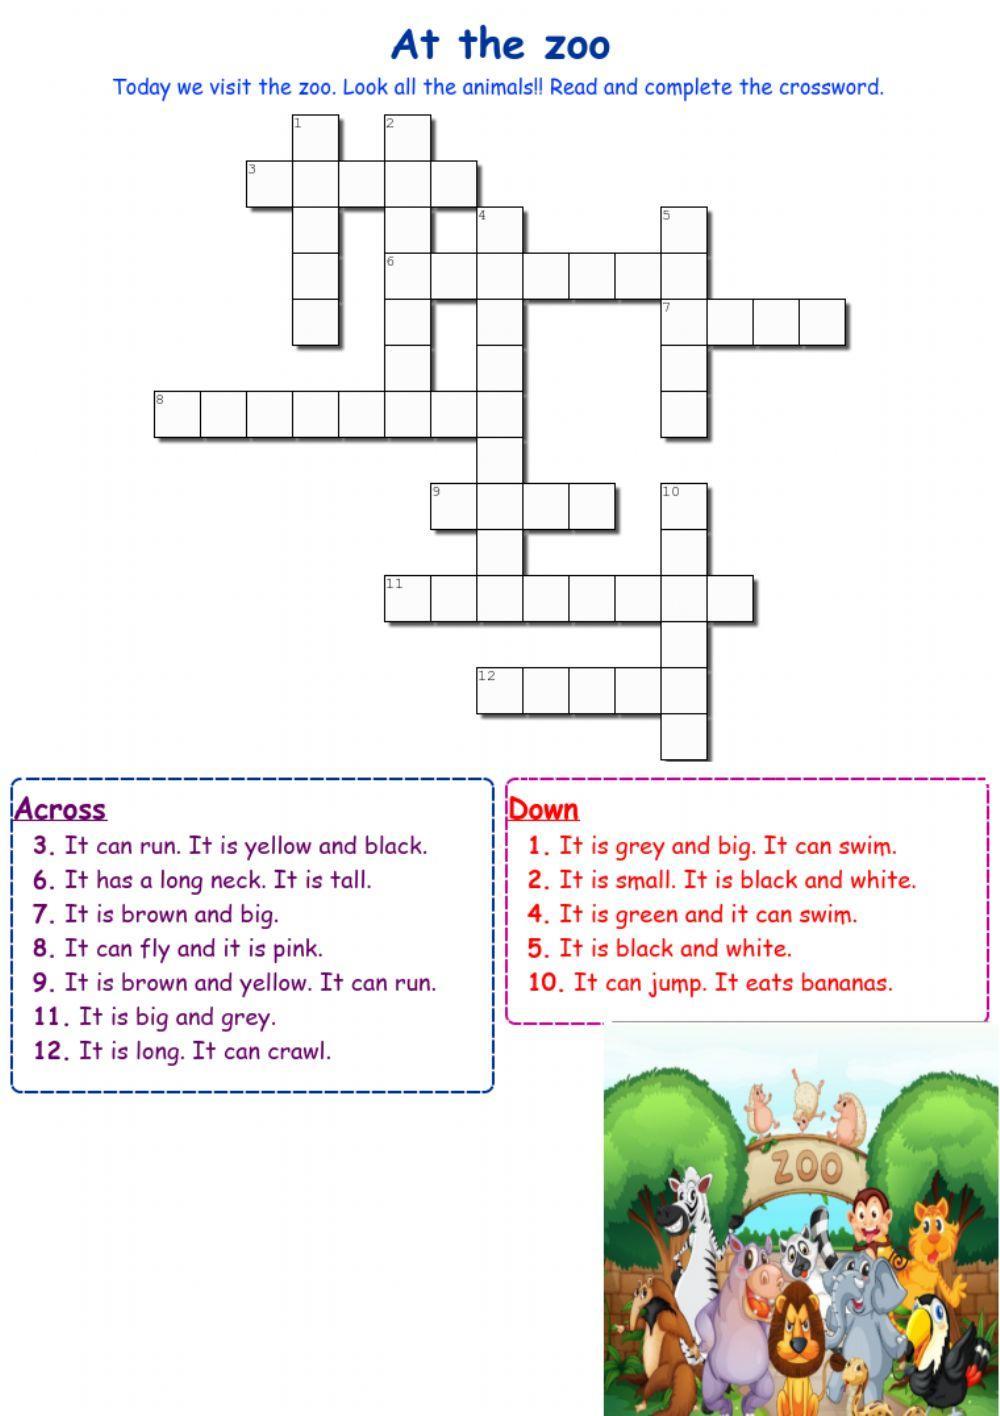 Animals at the zoo - Crossword